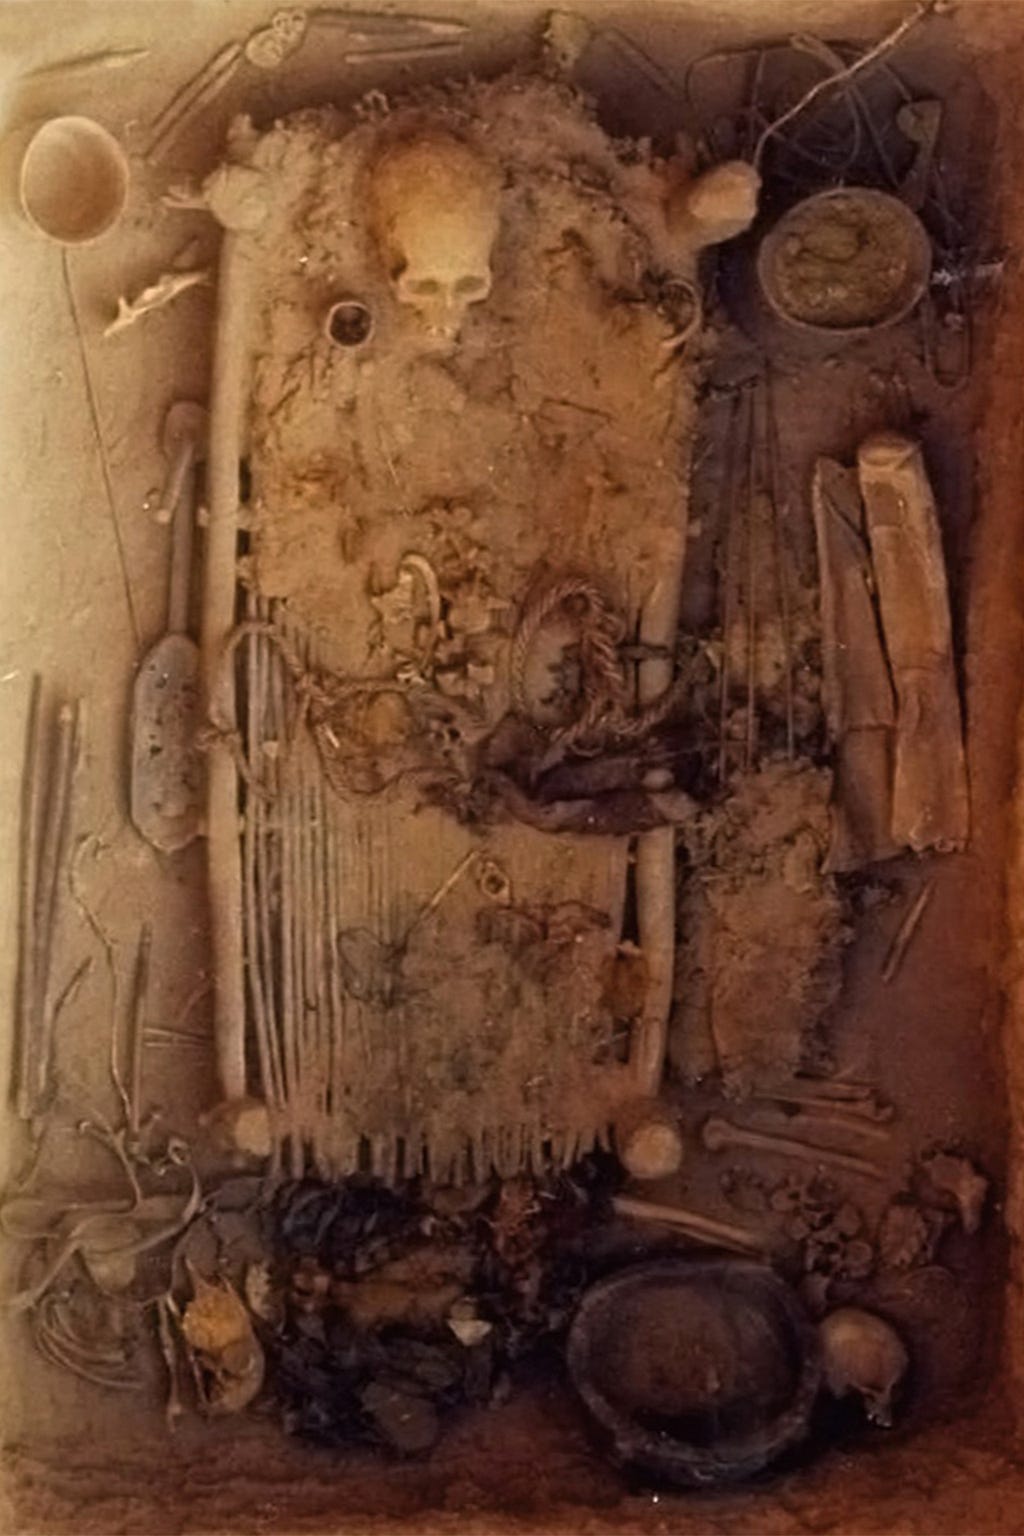 A skeleton rests on a bier made of long sticks in a dry, dusty grave. Various containers and implements surround the bier.